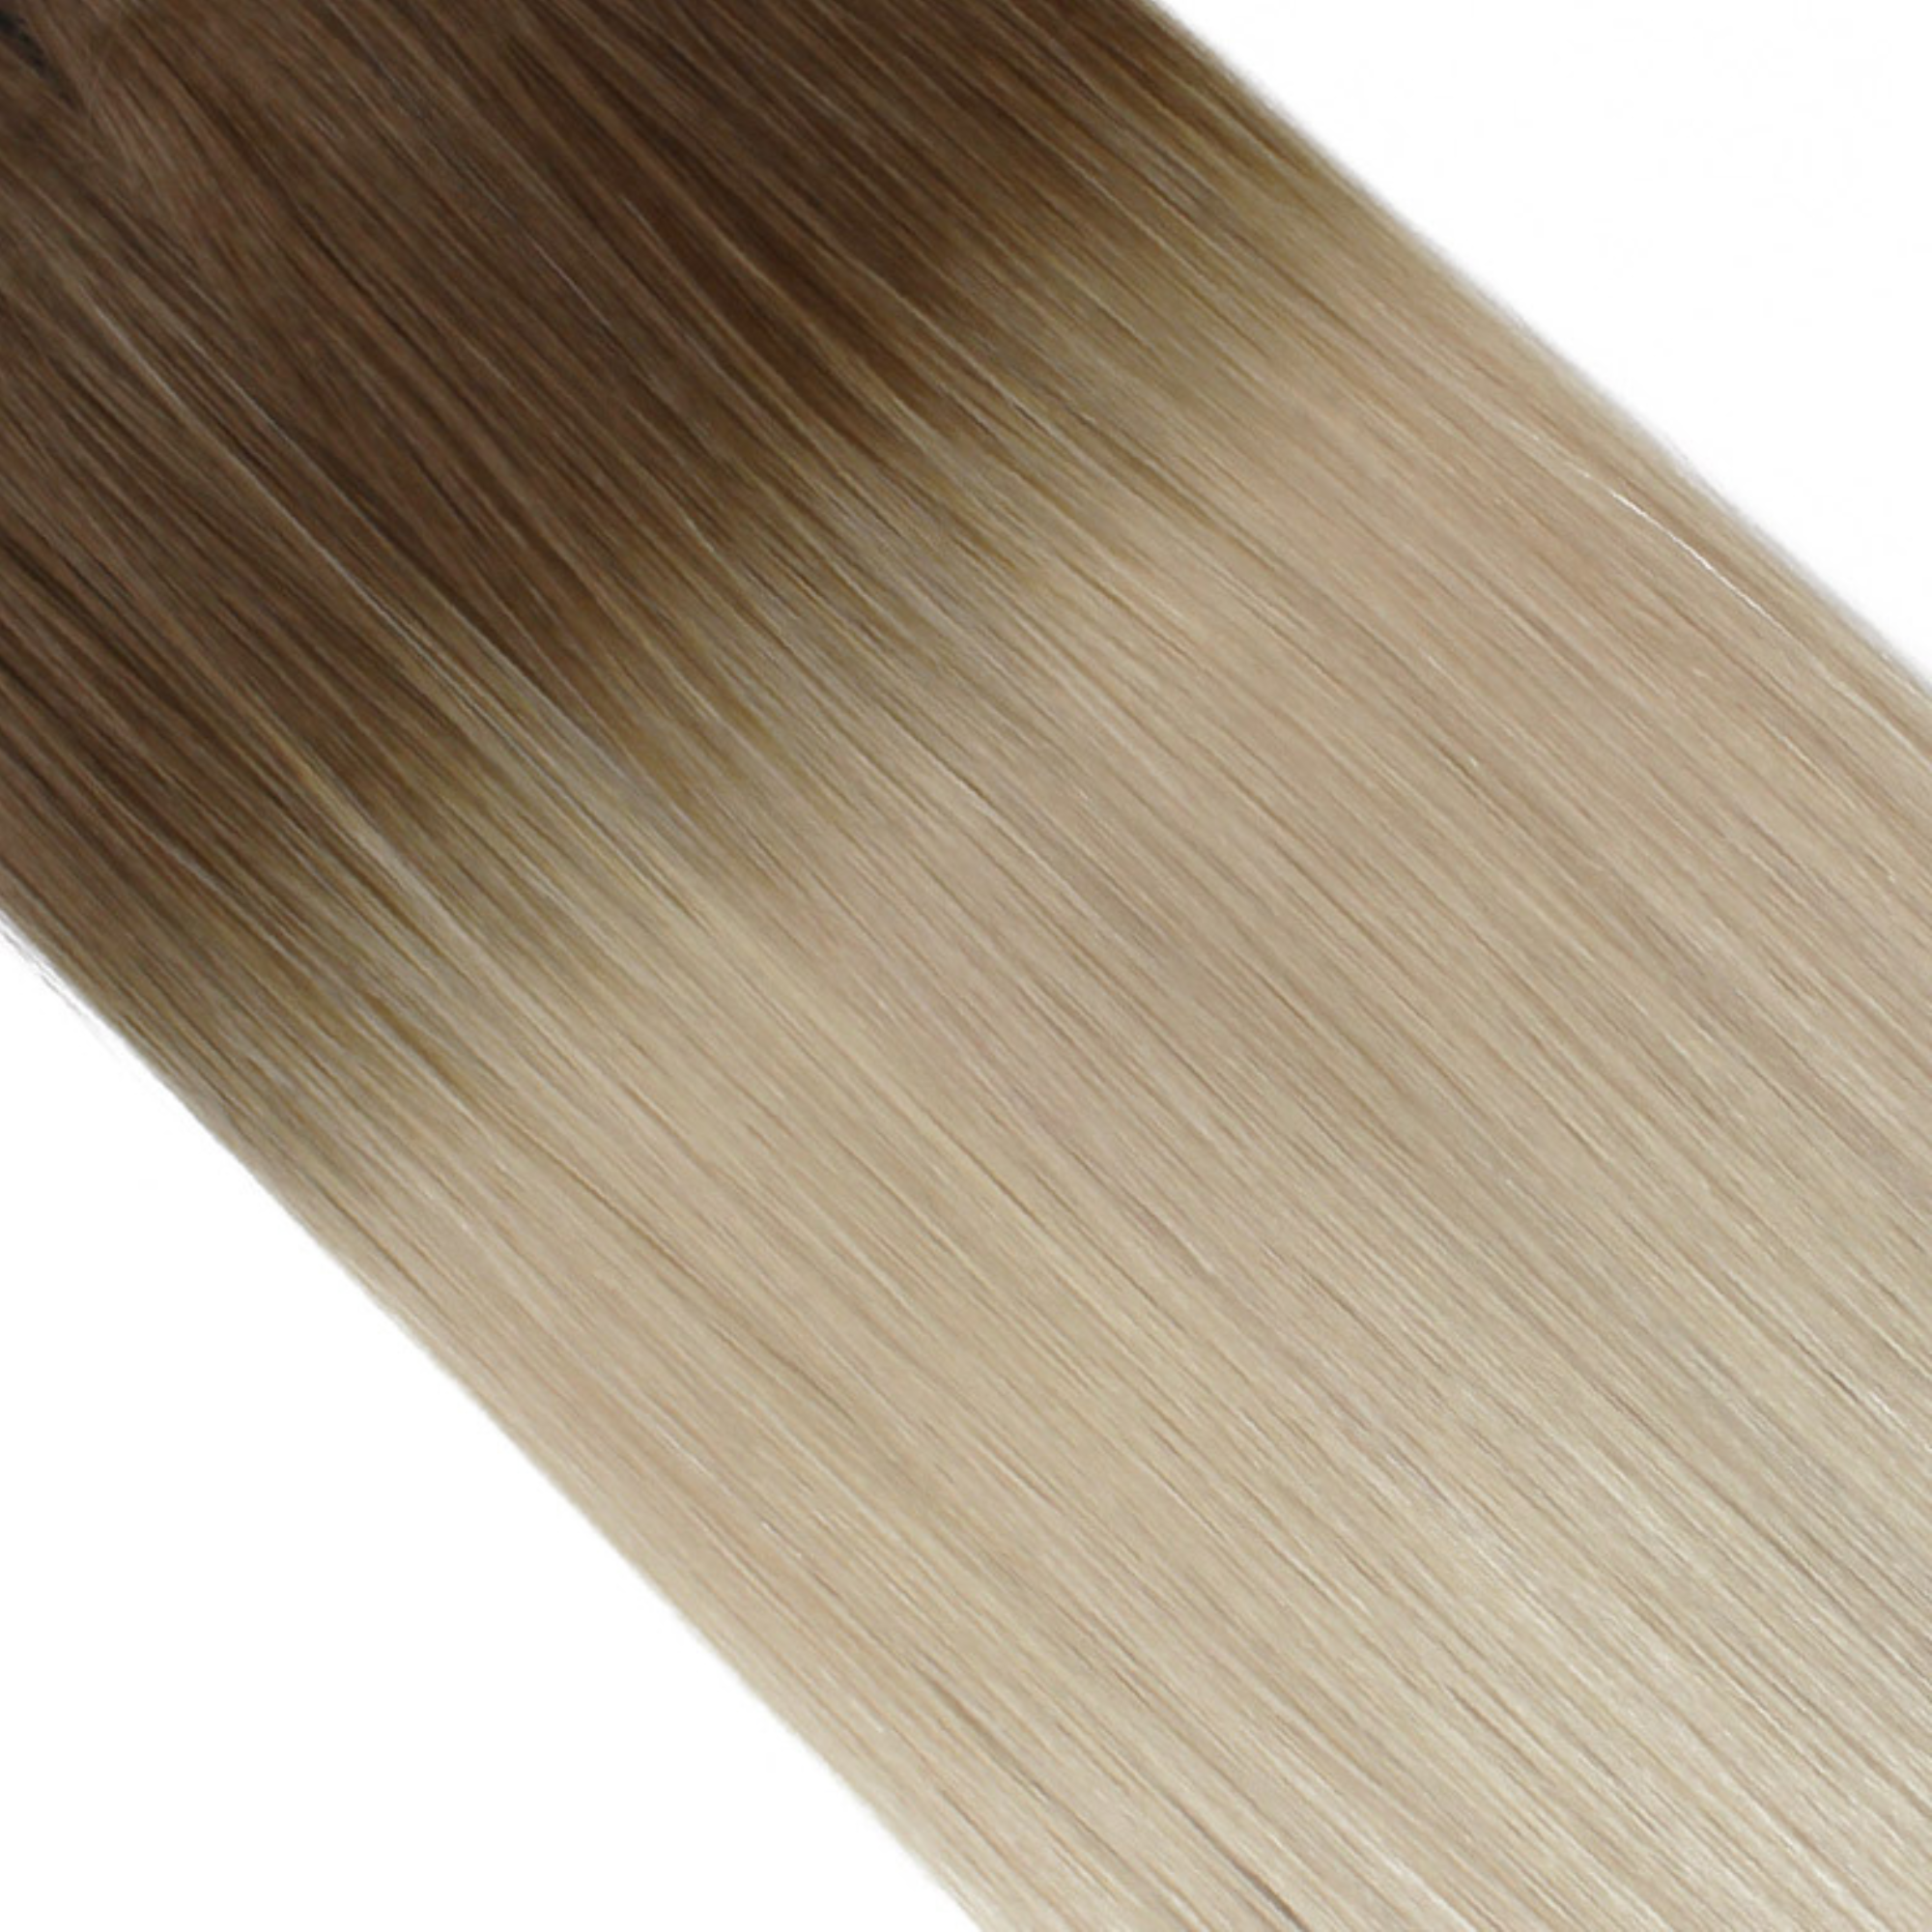 "hair rehab london 18" length 120 grams weight original clip-in hair extensions shade titled rooted blonde af"